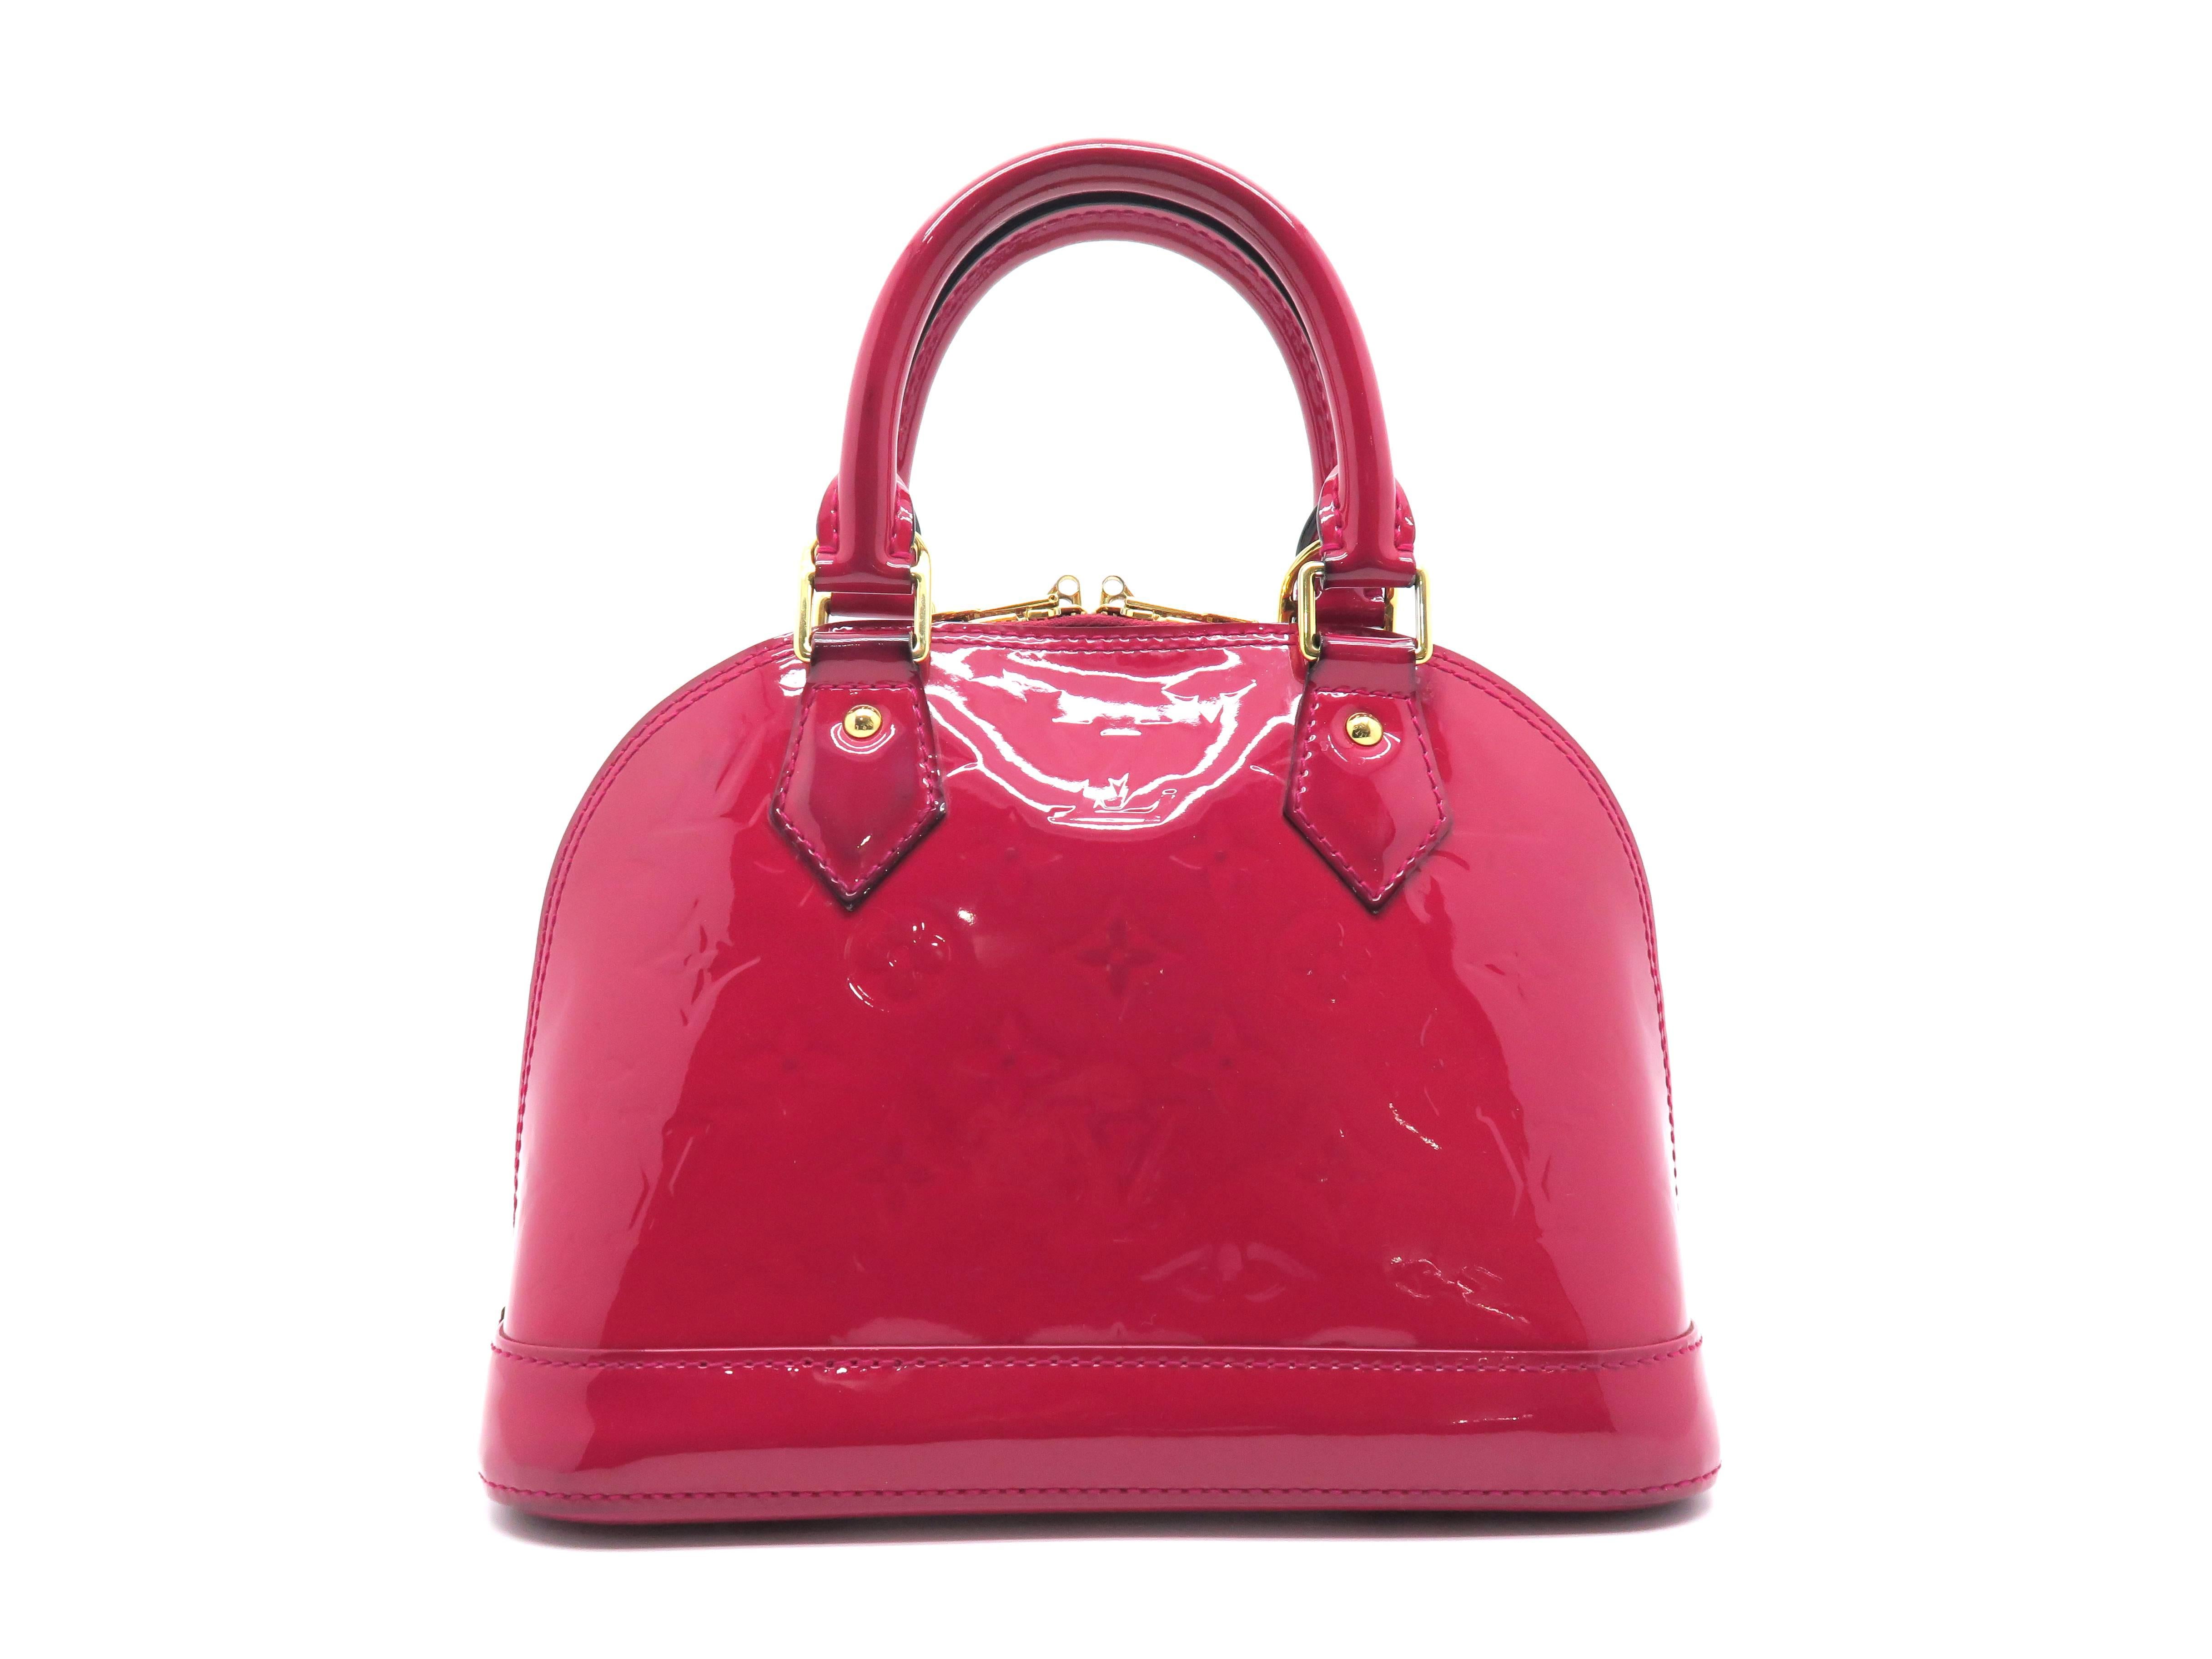 Louis Vuitton Alma BB Pink Vernis Satchel  In Good Condition For Sale In Kowloon, HK